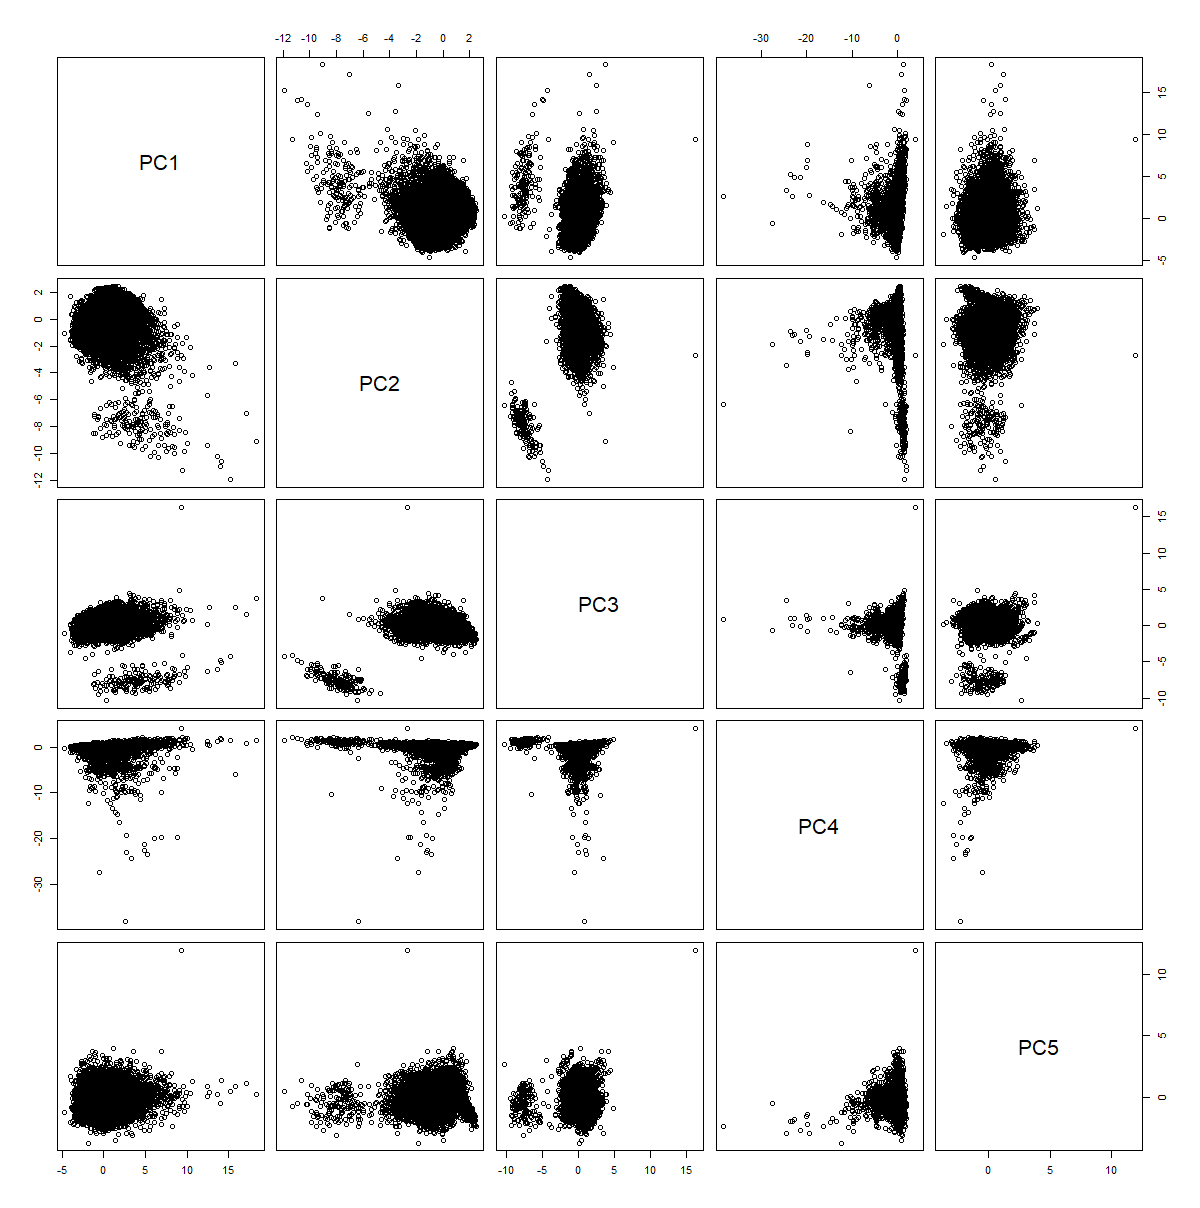 Bivariate plots of the PCA coordinate values. The distinct groups visible in all plots involving Principal Component 3 are due to discreteness in the data.